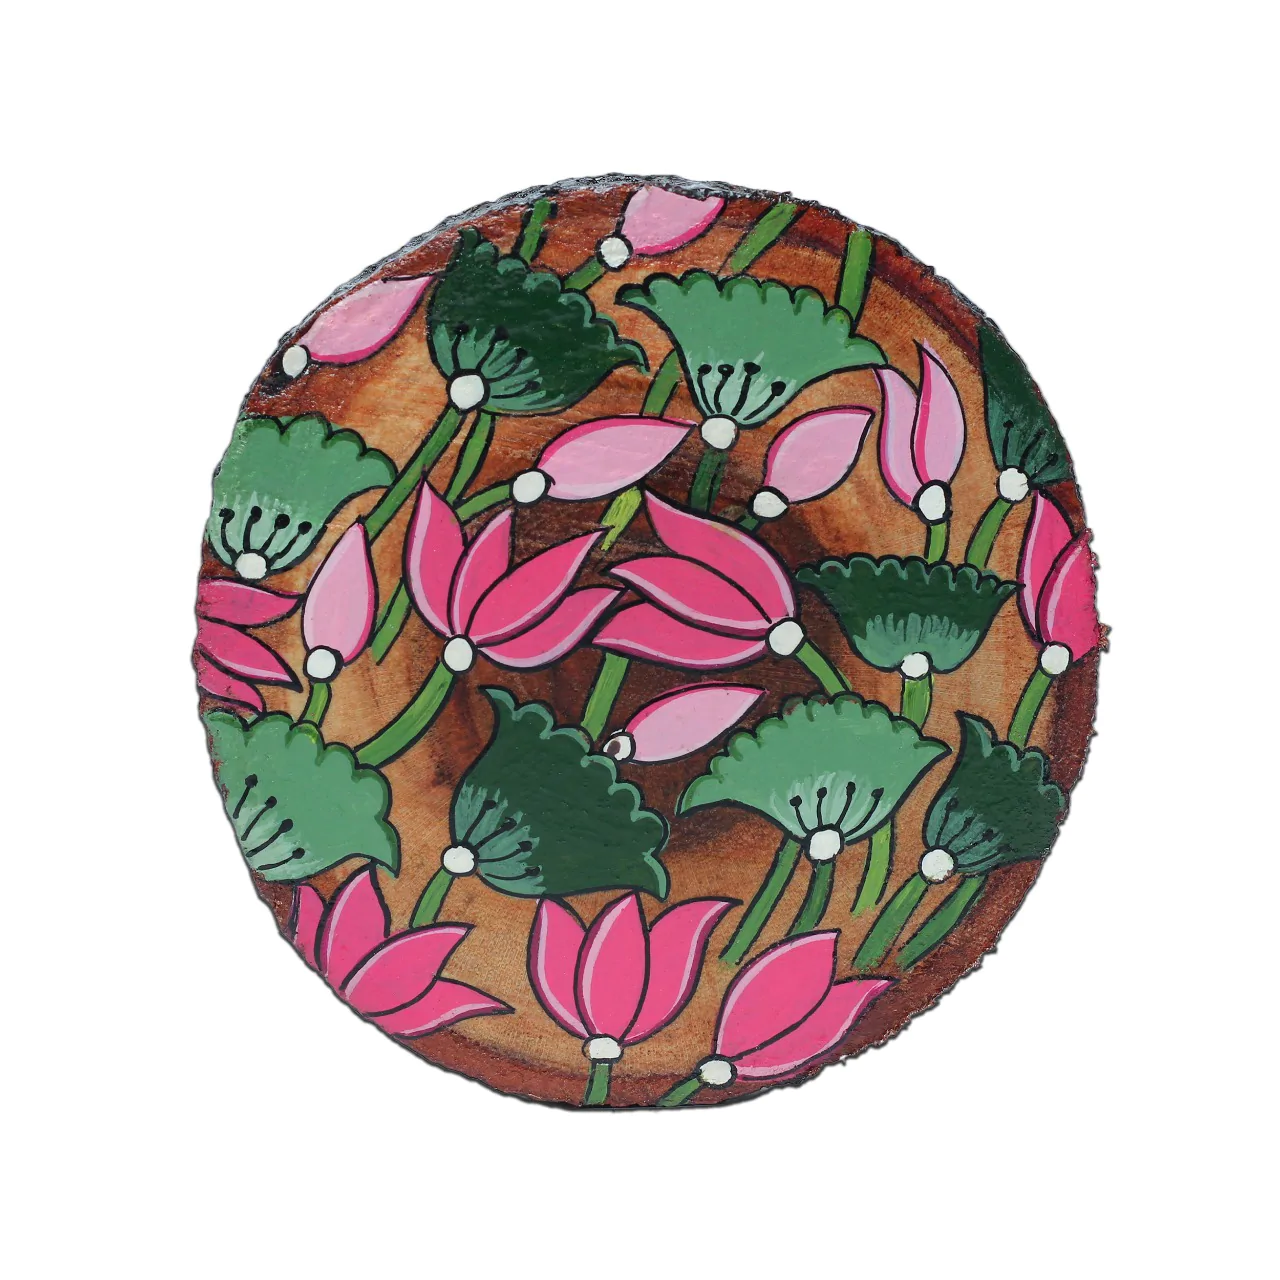 Hand Painted Wooden Coaster For Home Kitchen Decoration Ideas Online Buy Guthali.com 1024×1024@2x